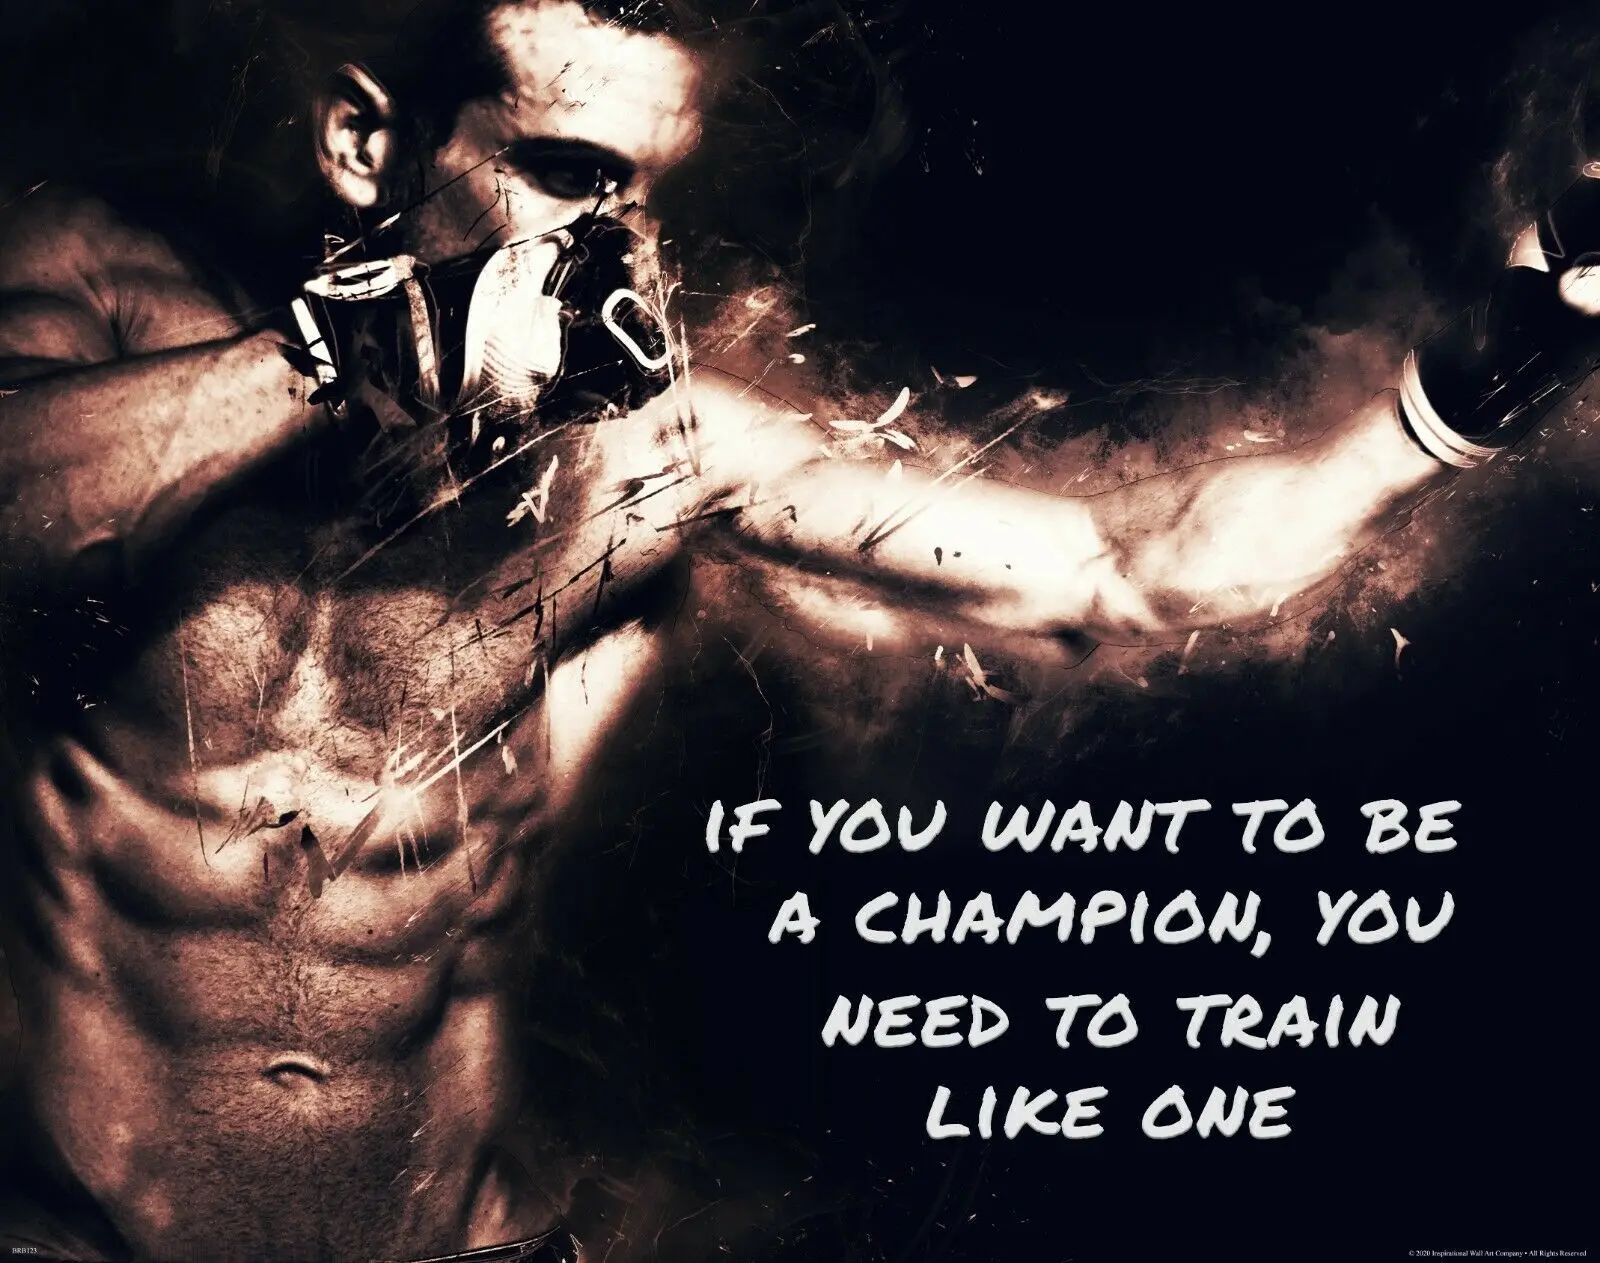 Train Like Quote MMA Boxing Gym Motivational Art Silk Poster Print 24x36inch